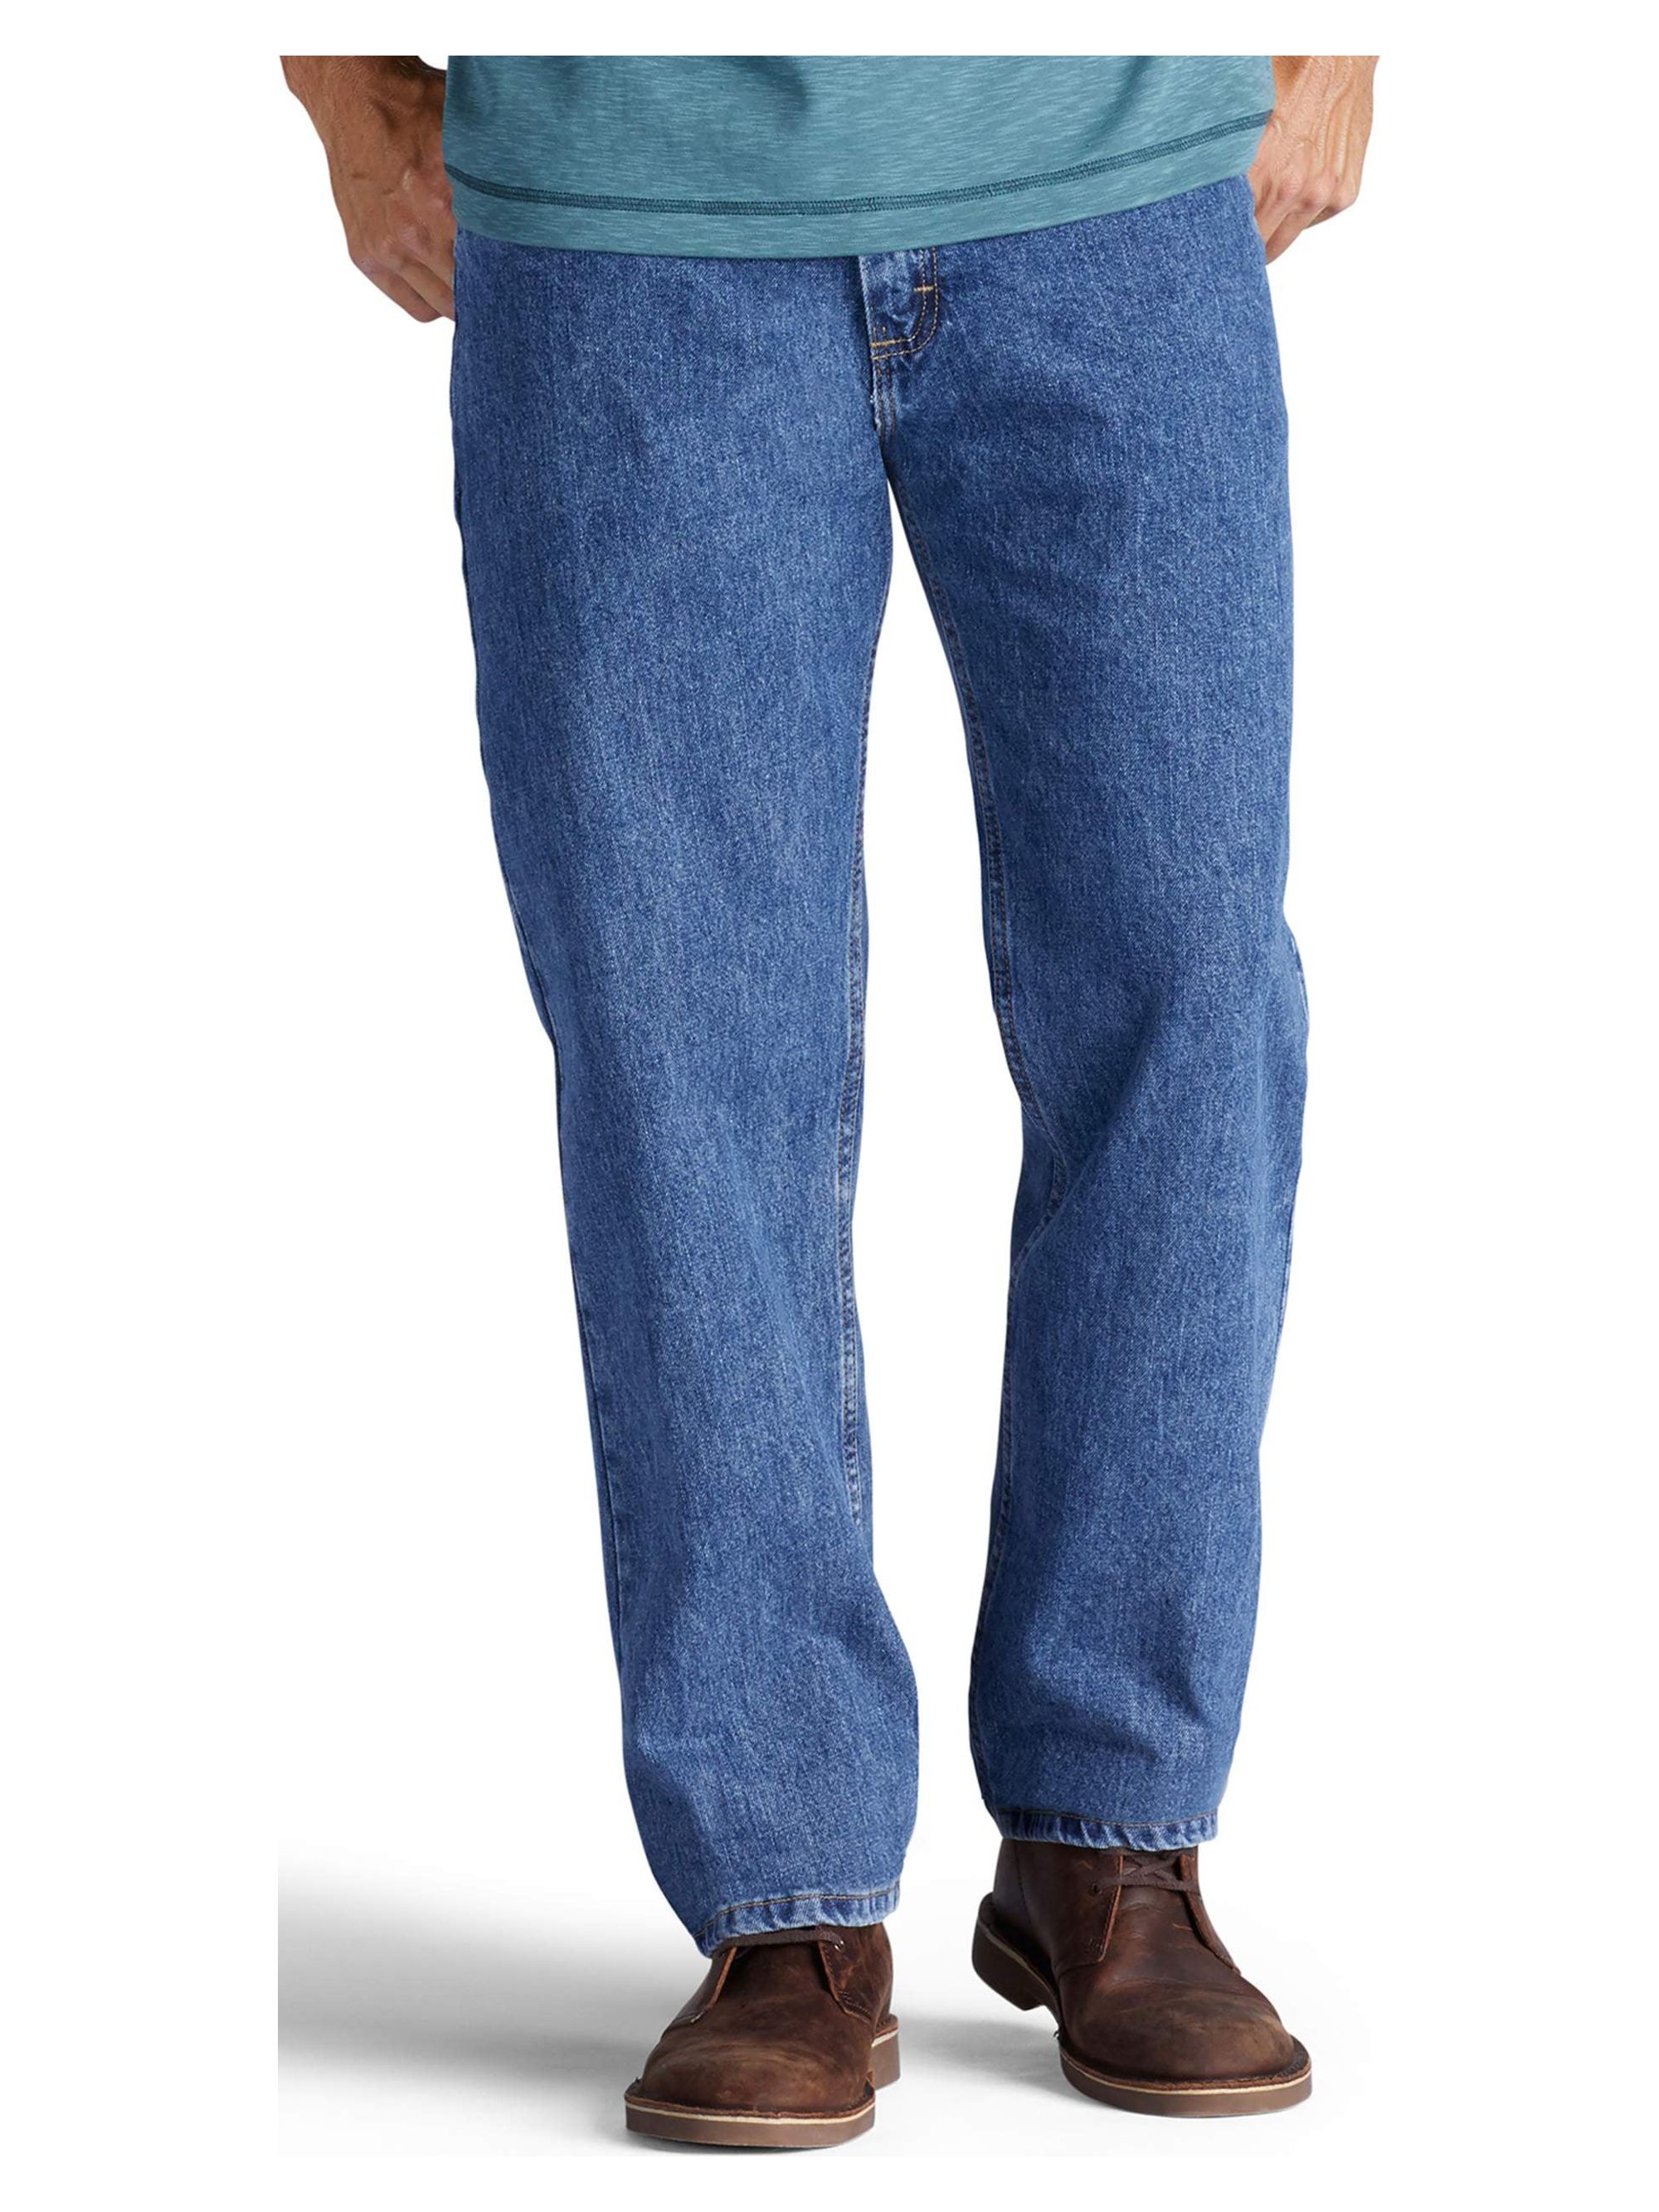 Lee Men's Relaxed Fit Straight Leg Jeans - image 1 of 3